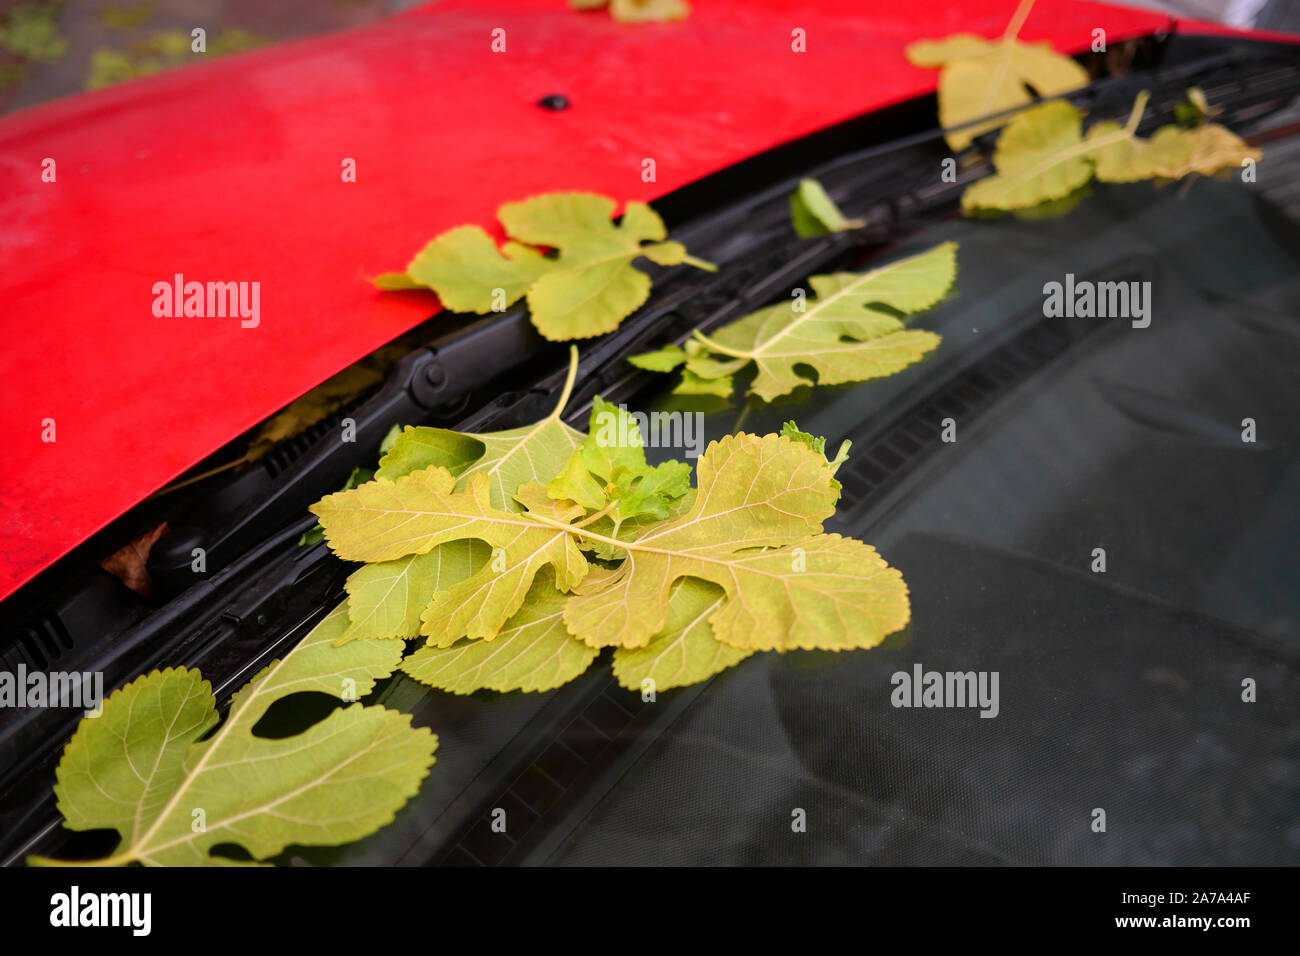 Autumn mood. Fallen yellow leaves on windshield and car wipers, of parked red car. Autumn concept. Close-up. Stock Photo